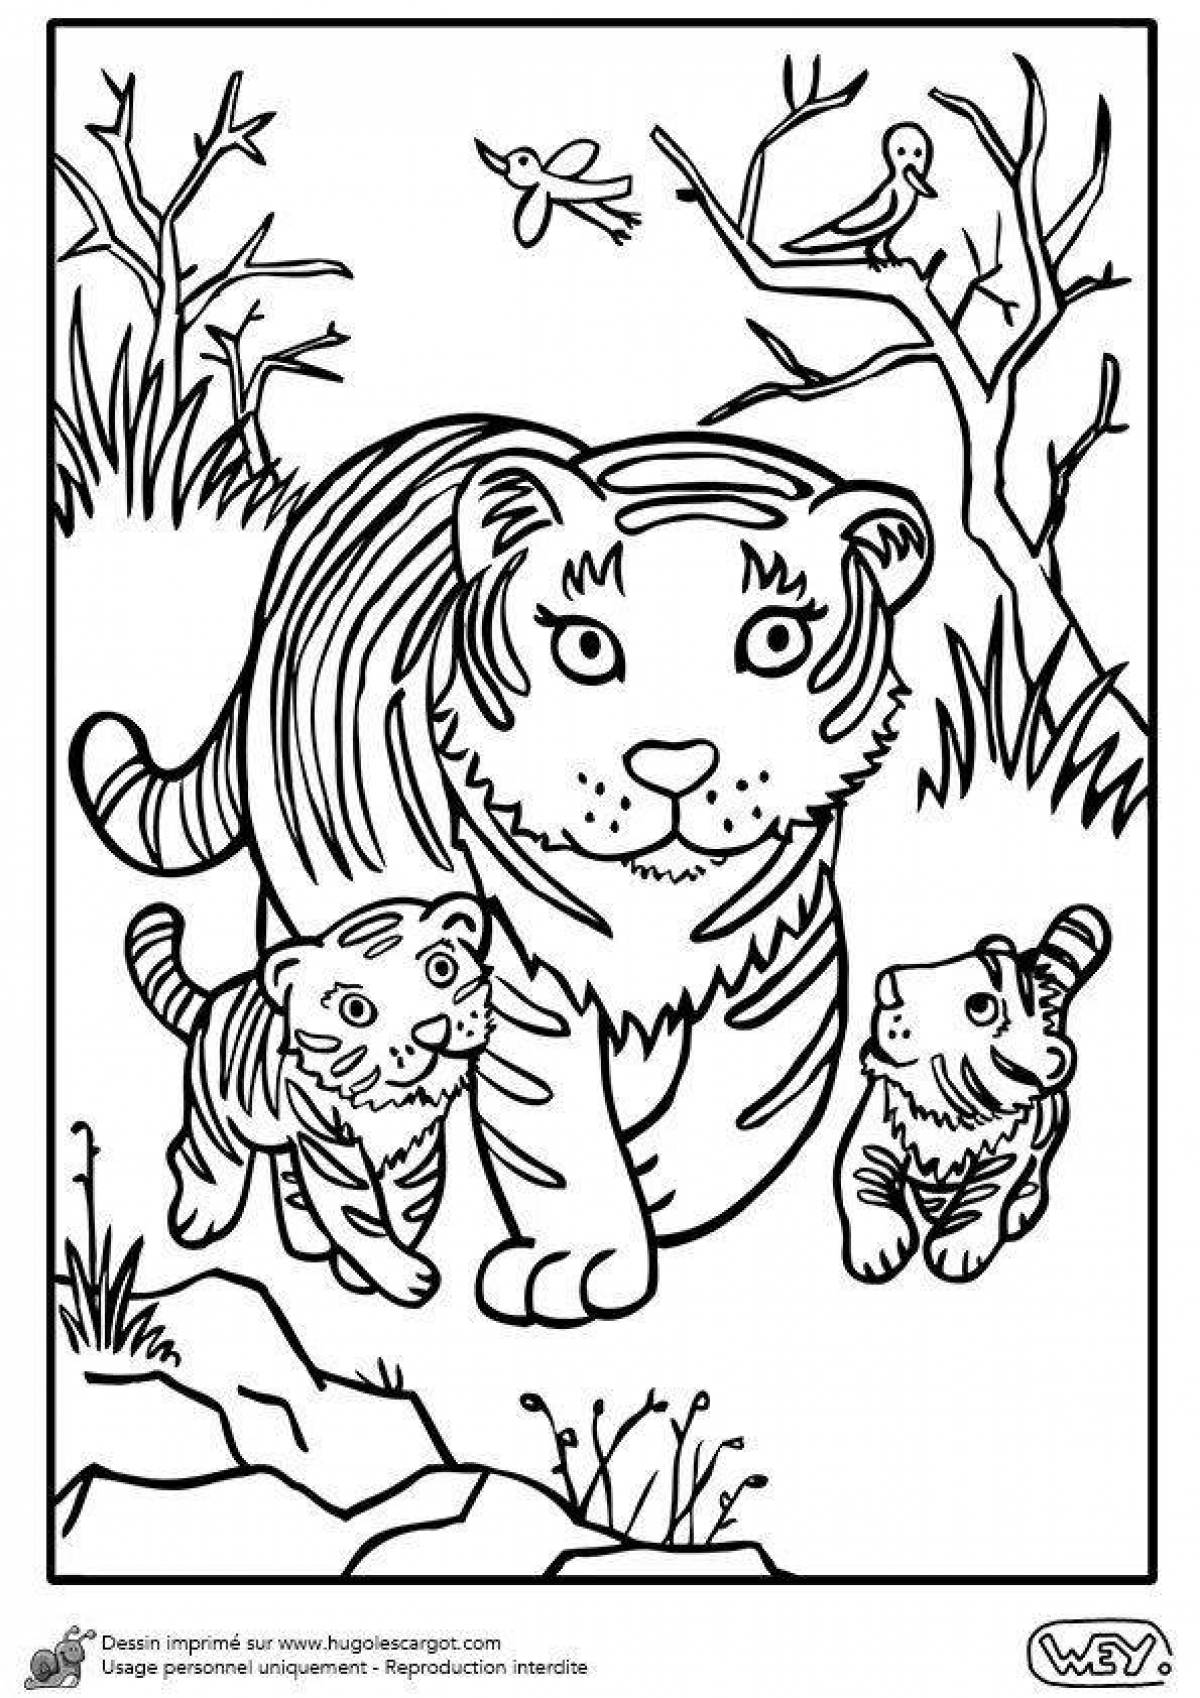 Colorful wild animal and baby coloring page